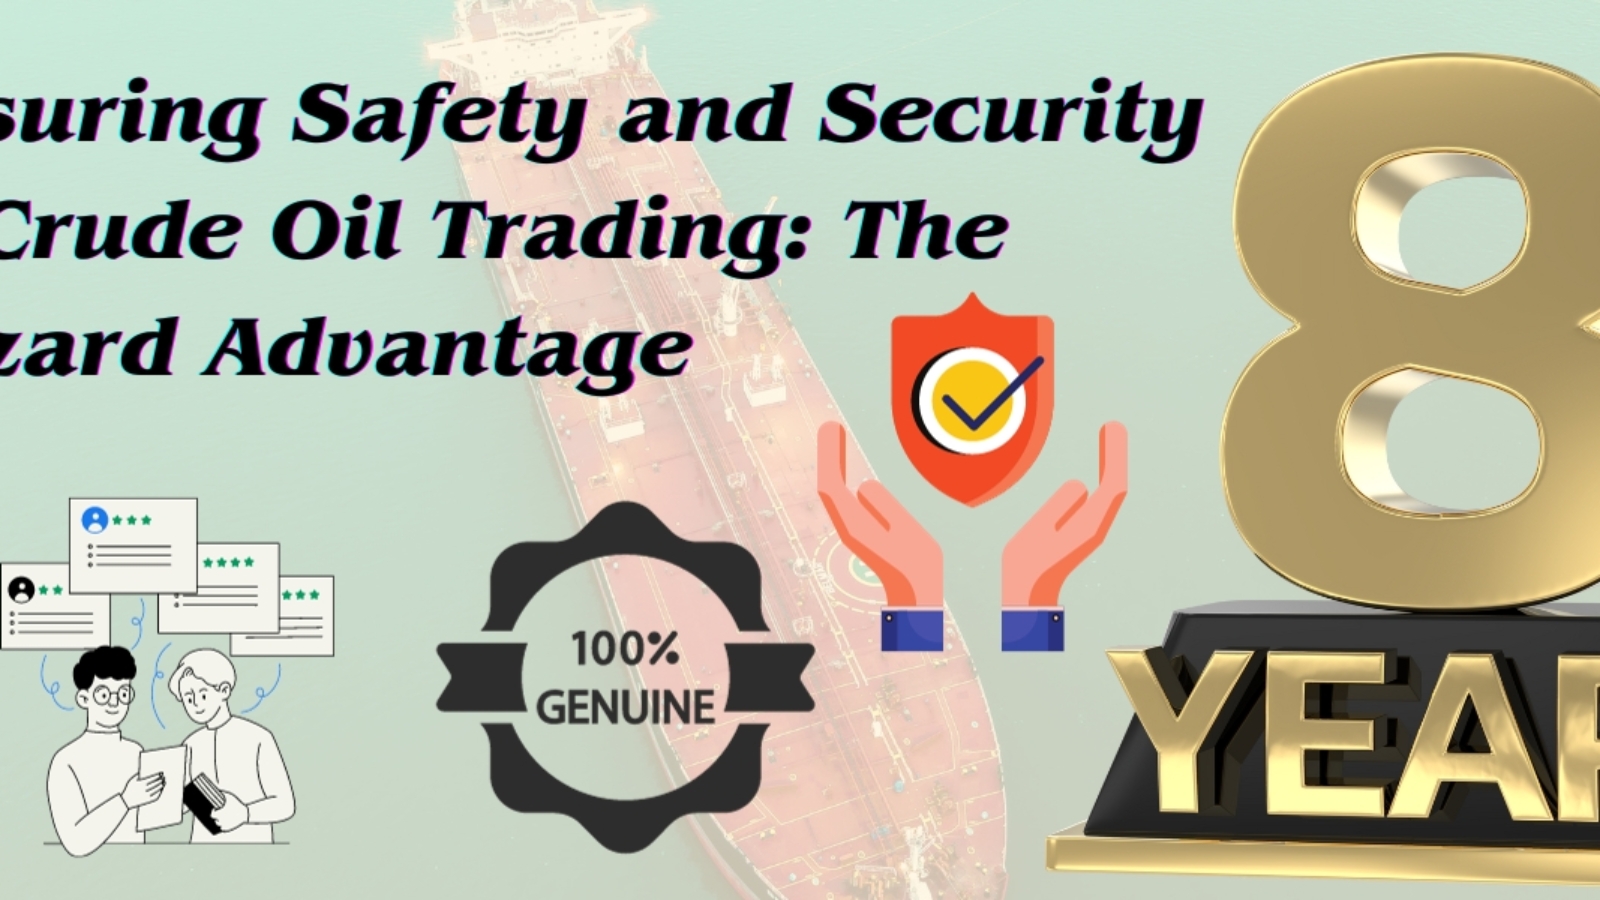 Ensuring Safety and Security in Crude Oil Trading The Klizard Advantage